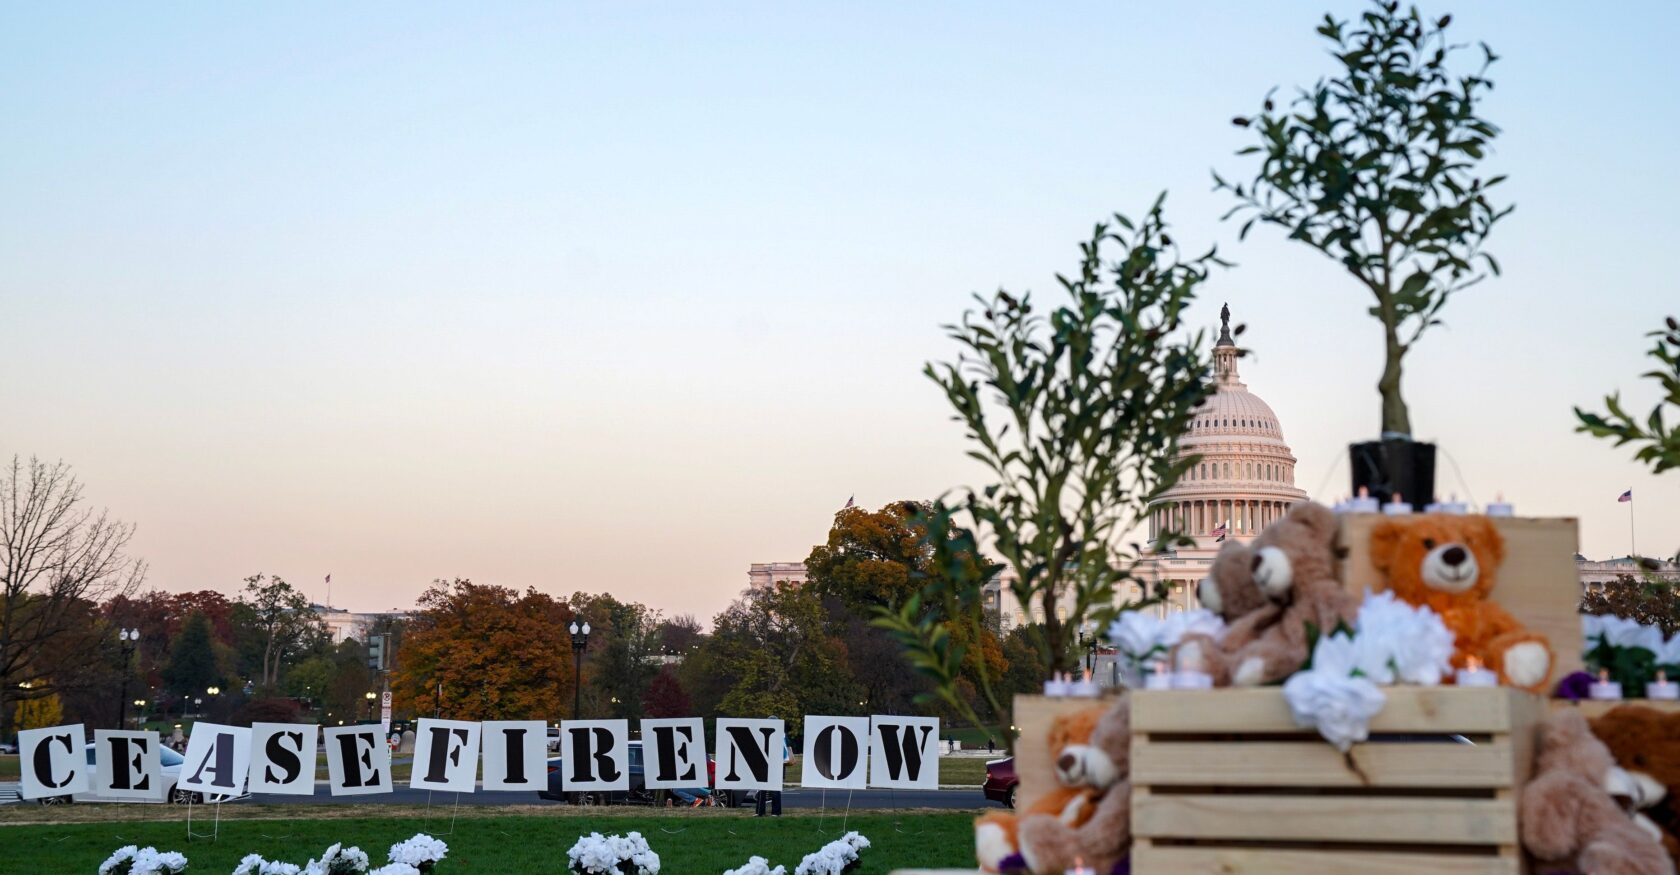 Win Without War Education Fund Builds Temporary Memorial Art Installation On The National Mall Mourning The Number Of Deaths And Calling For A Safe Return Of Hostages And A Ceasefire In The Ongoing Israel – Hamas War